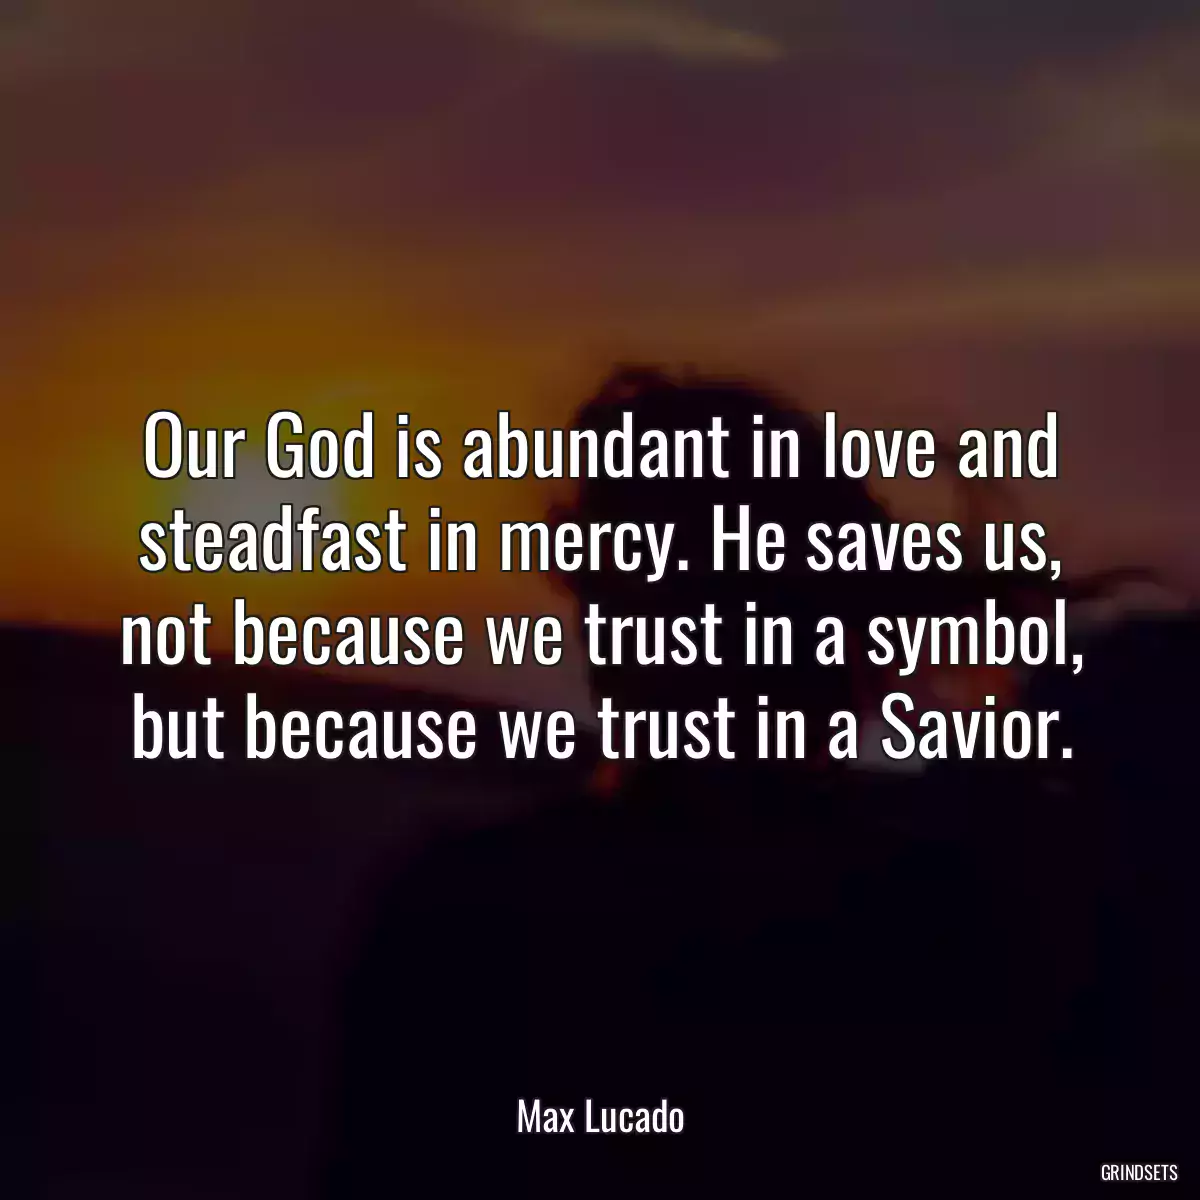 Our God is abundant in love and steadfast in mercy. He saves us, not because we trust in a symbol, but because we trust in a Savior.